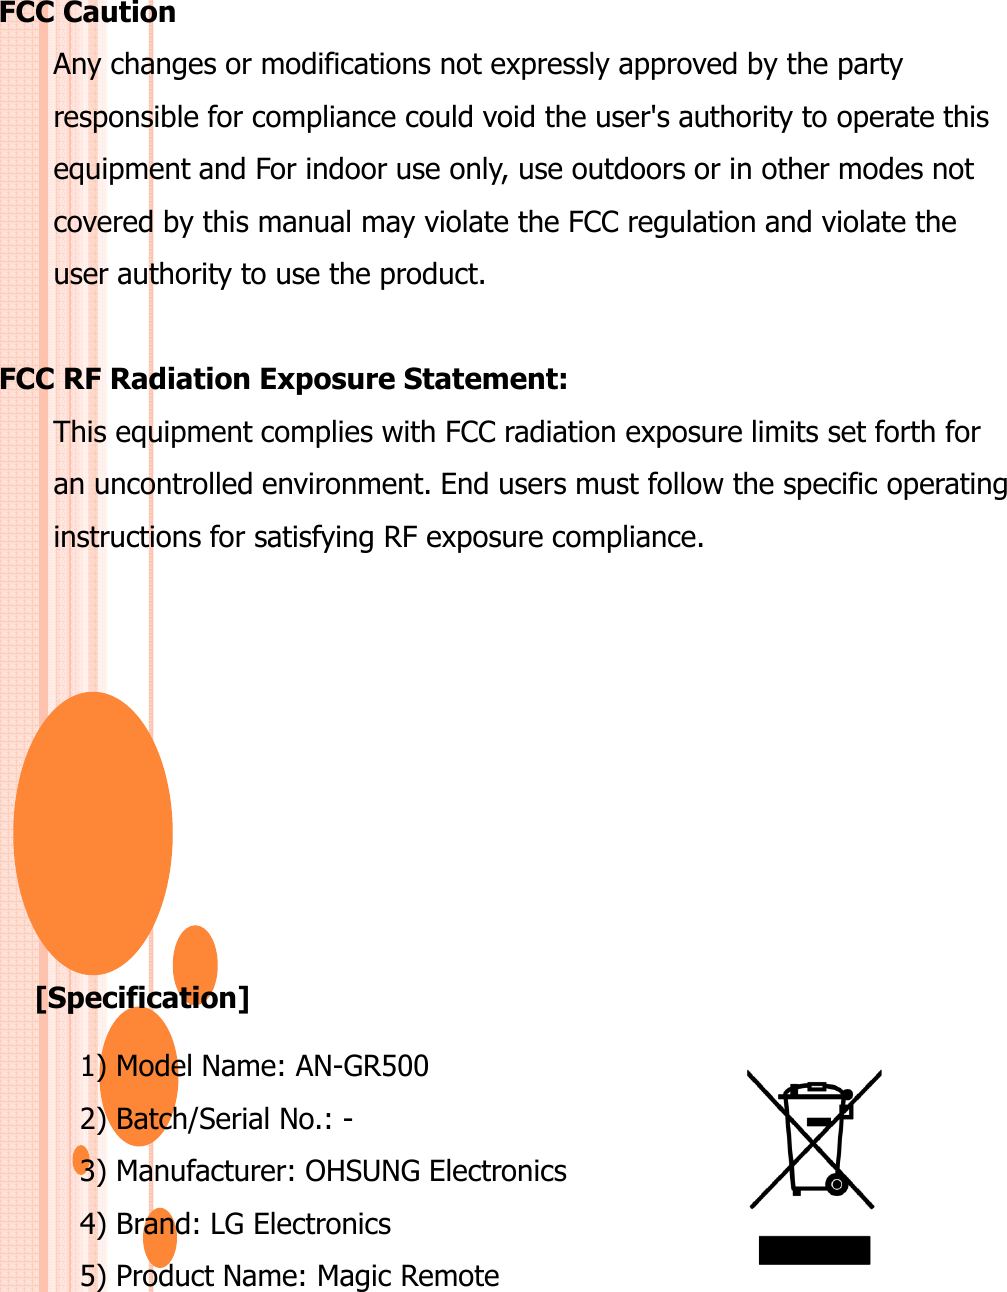 FCC CautionAny changes or modifications not expressly approved by the party responsible for compliance could void the user&apos;s authority to operate thisequipment and For indoor use only, use outdoors or in other modes notcovered by this manual may violate the FCC regulation and violate theuser authority to use the product.FCC RF Radiation Exposure Statement:This equipment complies with FCC radiation exposure limits set forth foran uncontrolled environment. End users must follow the specific operatinginstructions for satisfying RF exposure compliance.[Specification]1) Model Name: AN-GR5002) Batch/Serial No.: -3) Manufacturer: OHSUNG Electronics4) Brand: LG Electronics5) Product Name: Magic Remote